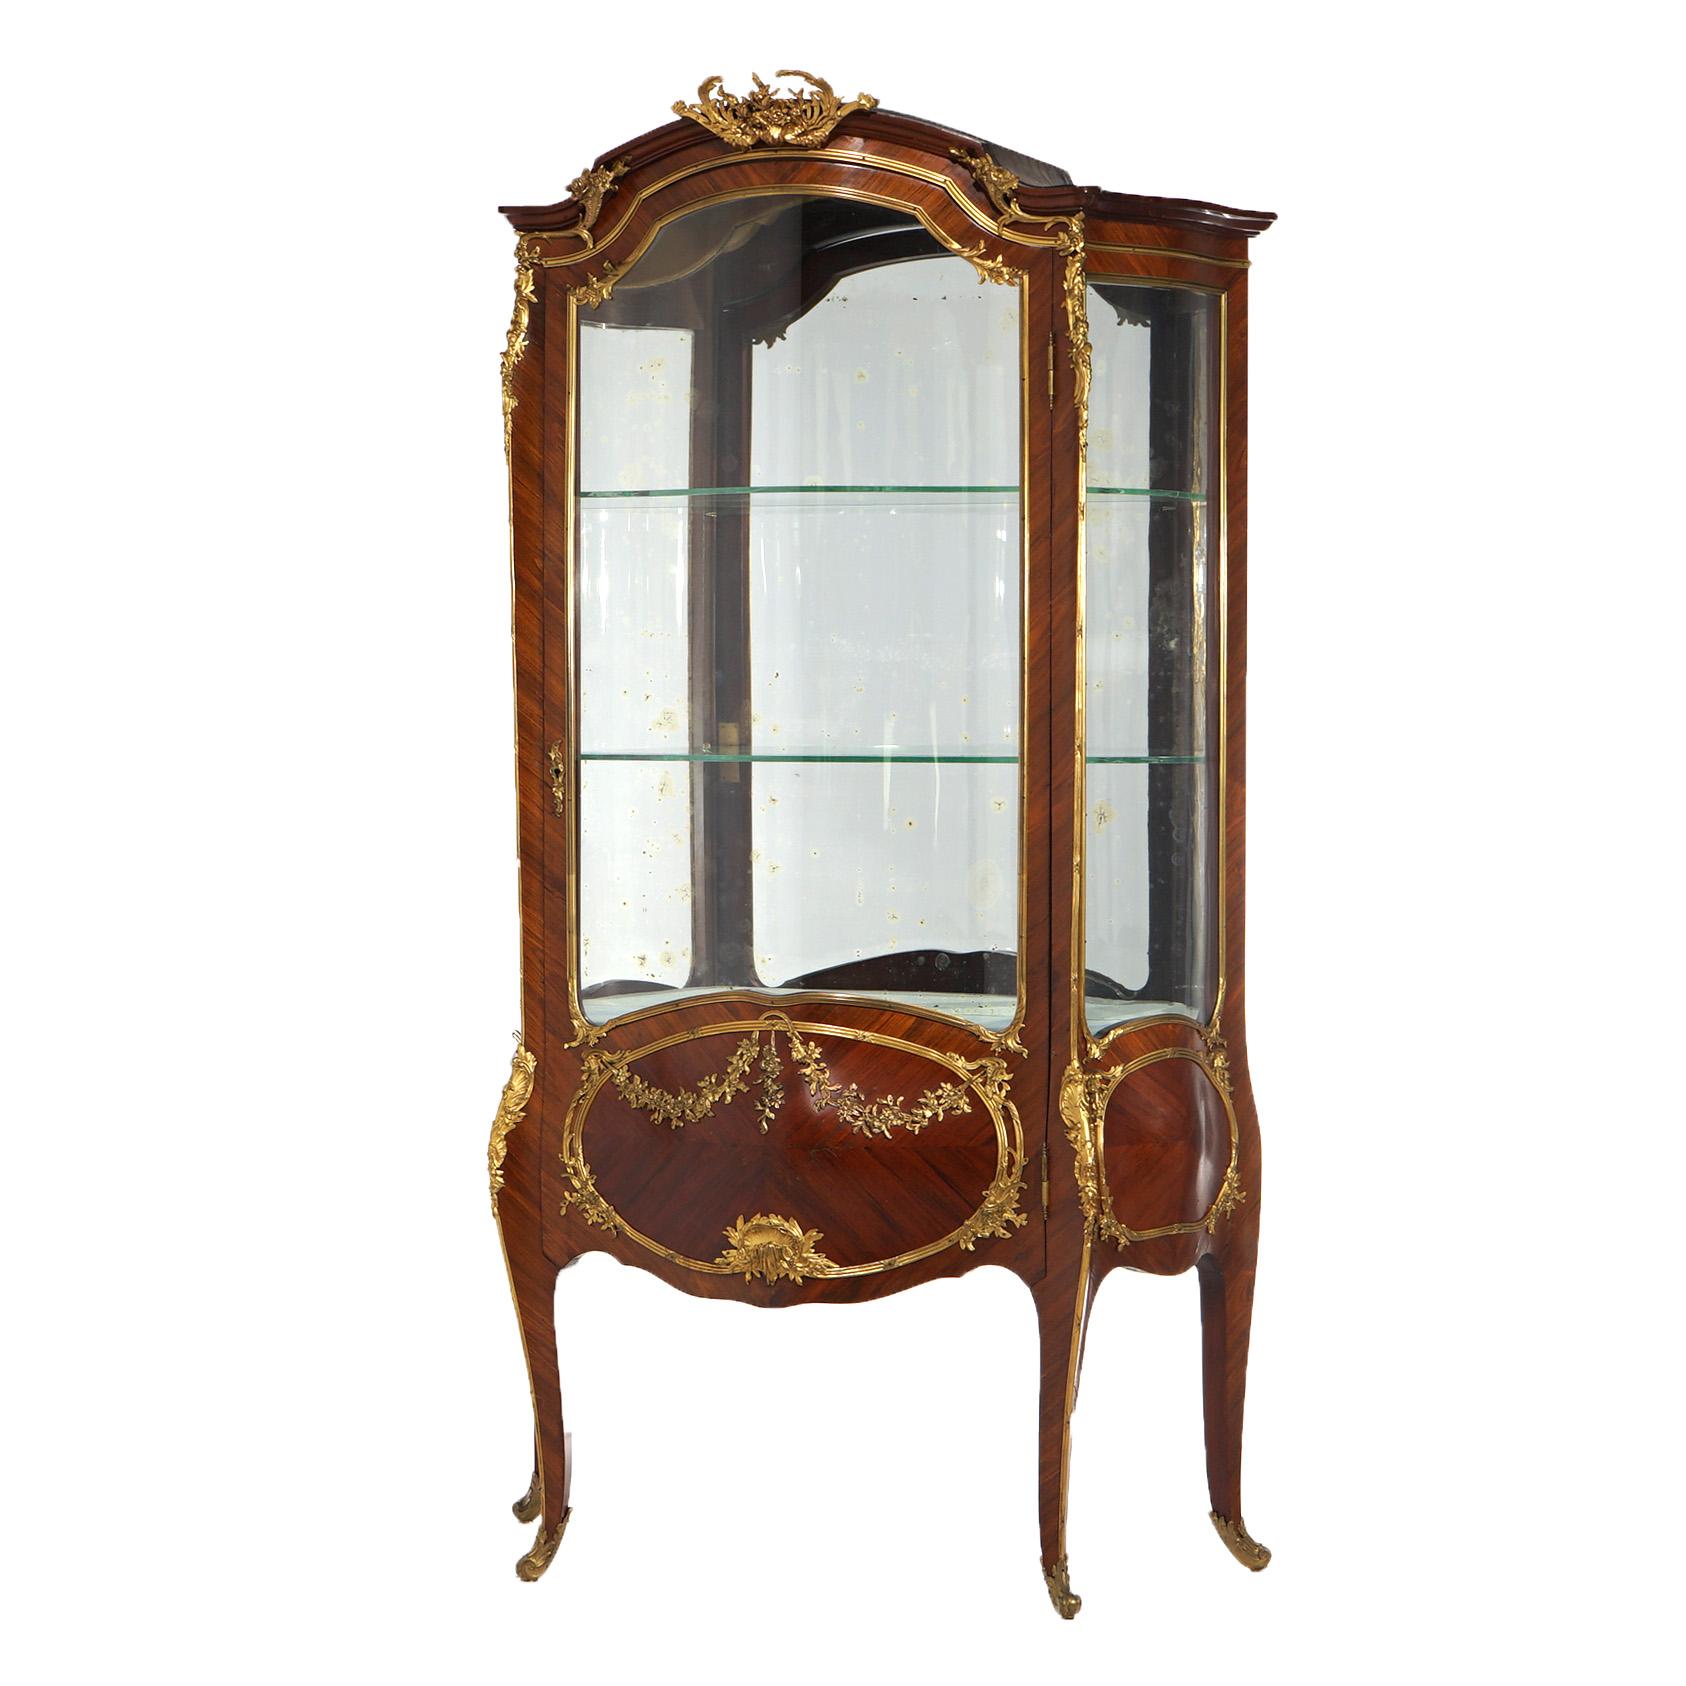 ***Ask About Reduced In-House Delivery Rates - Reliable Professional Service & Fully Insured***
Oversized Francois Linke (1855-1946) Signed Parisian Louis XIV vitrine offers kingwood and mahogany construction with cast foliate ormolu throughout,